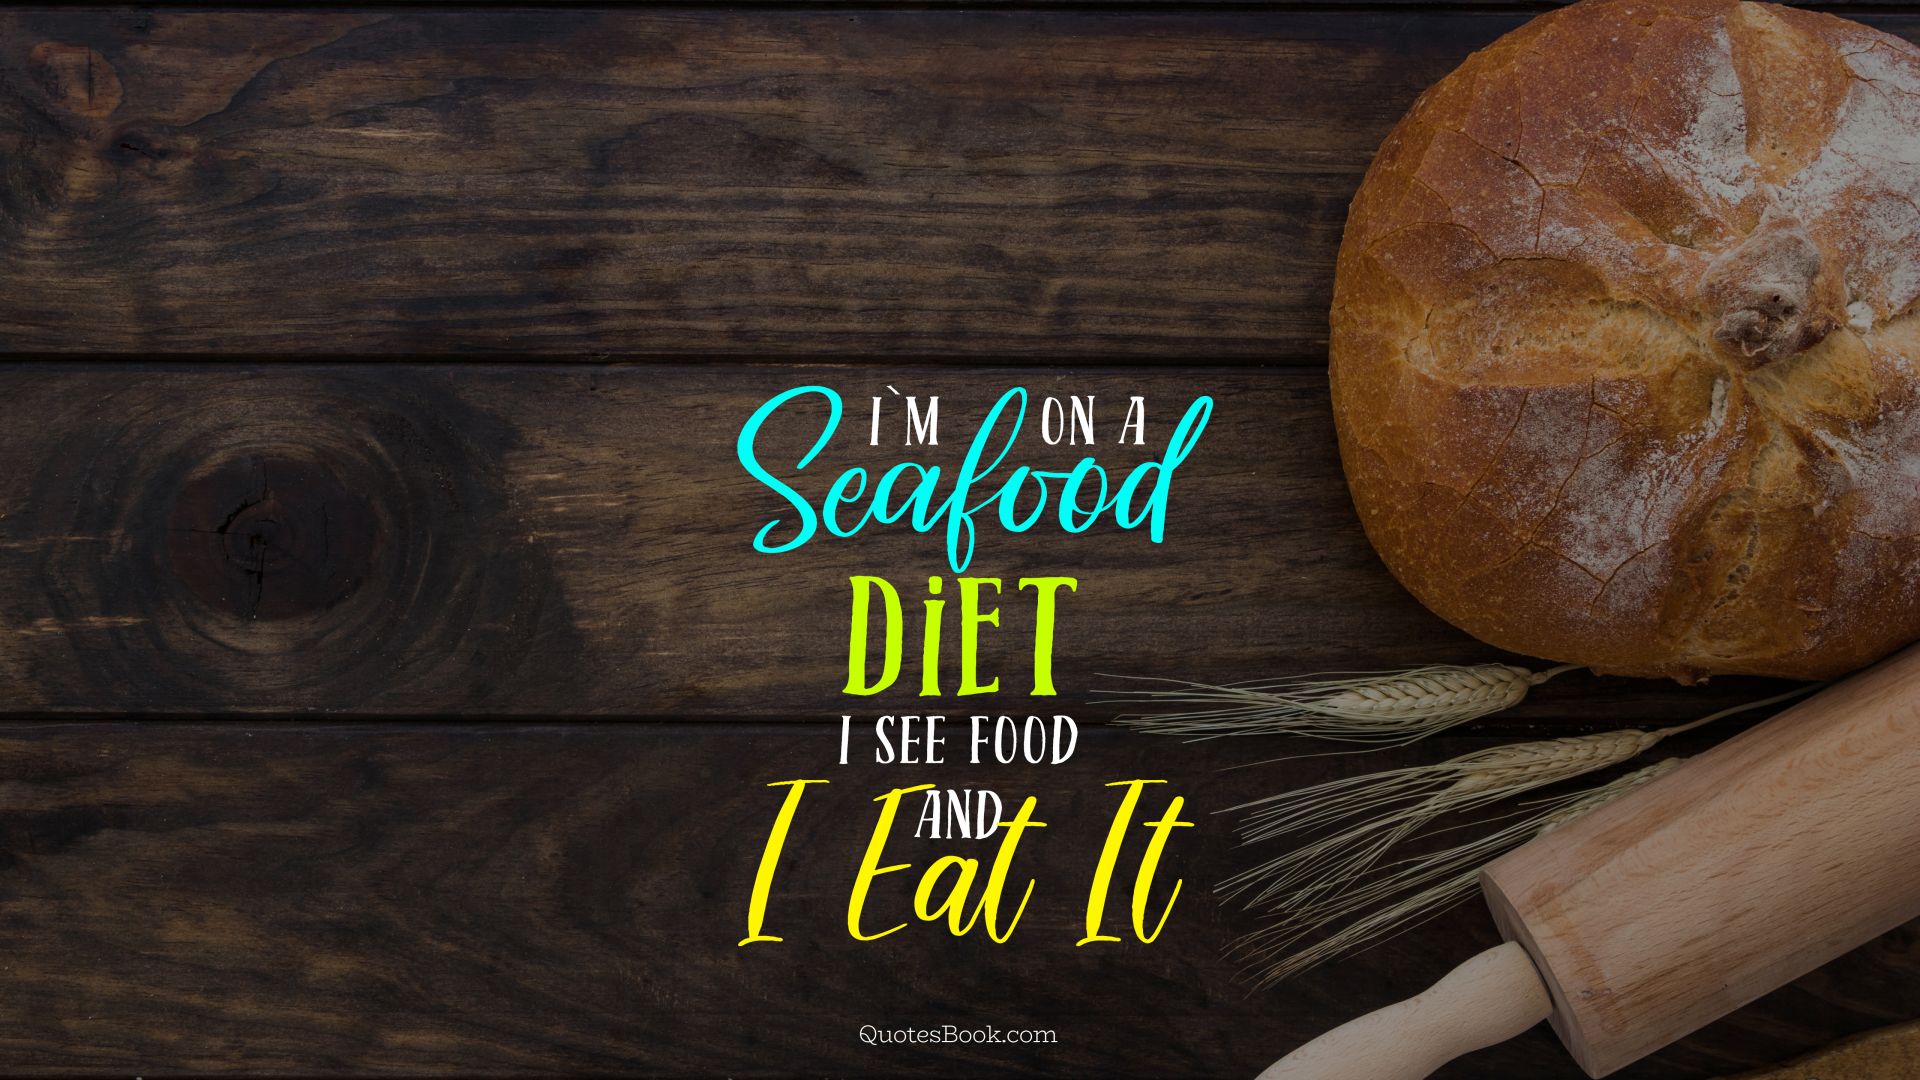 I`m on a seafood diet i see food and i eat it